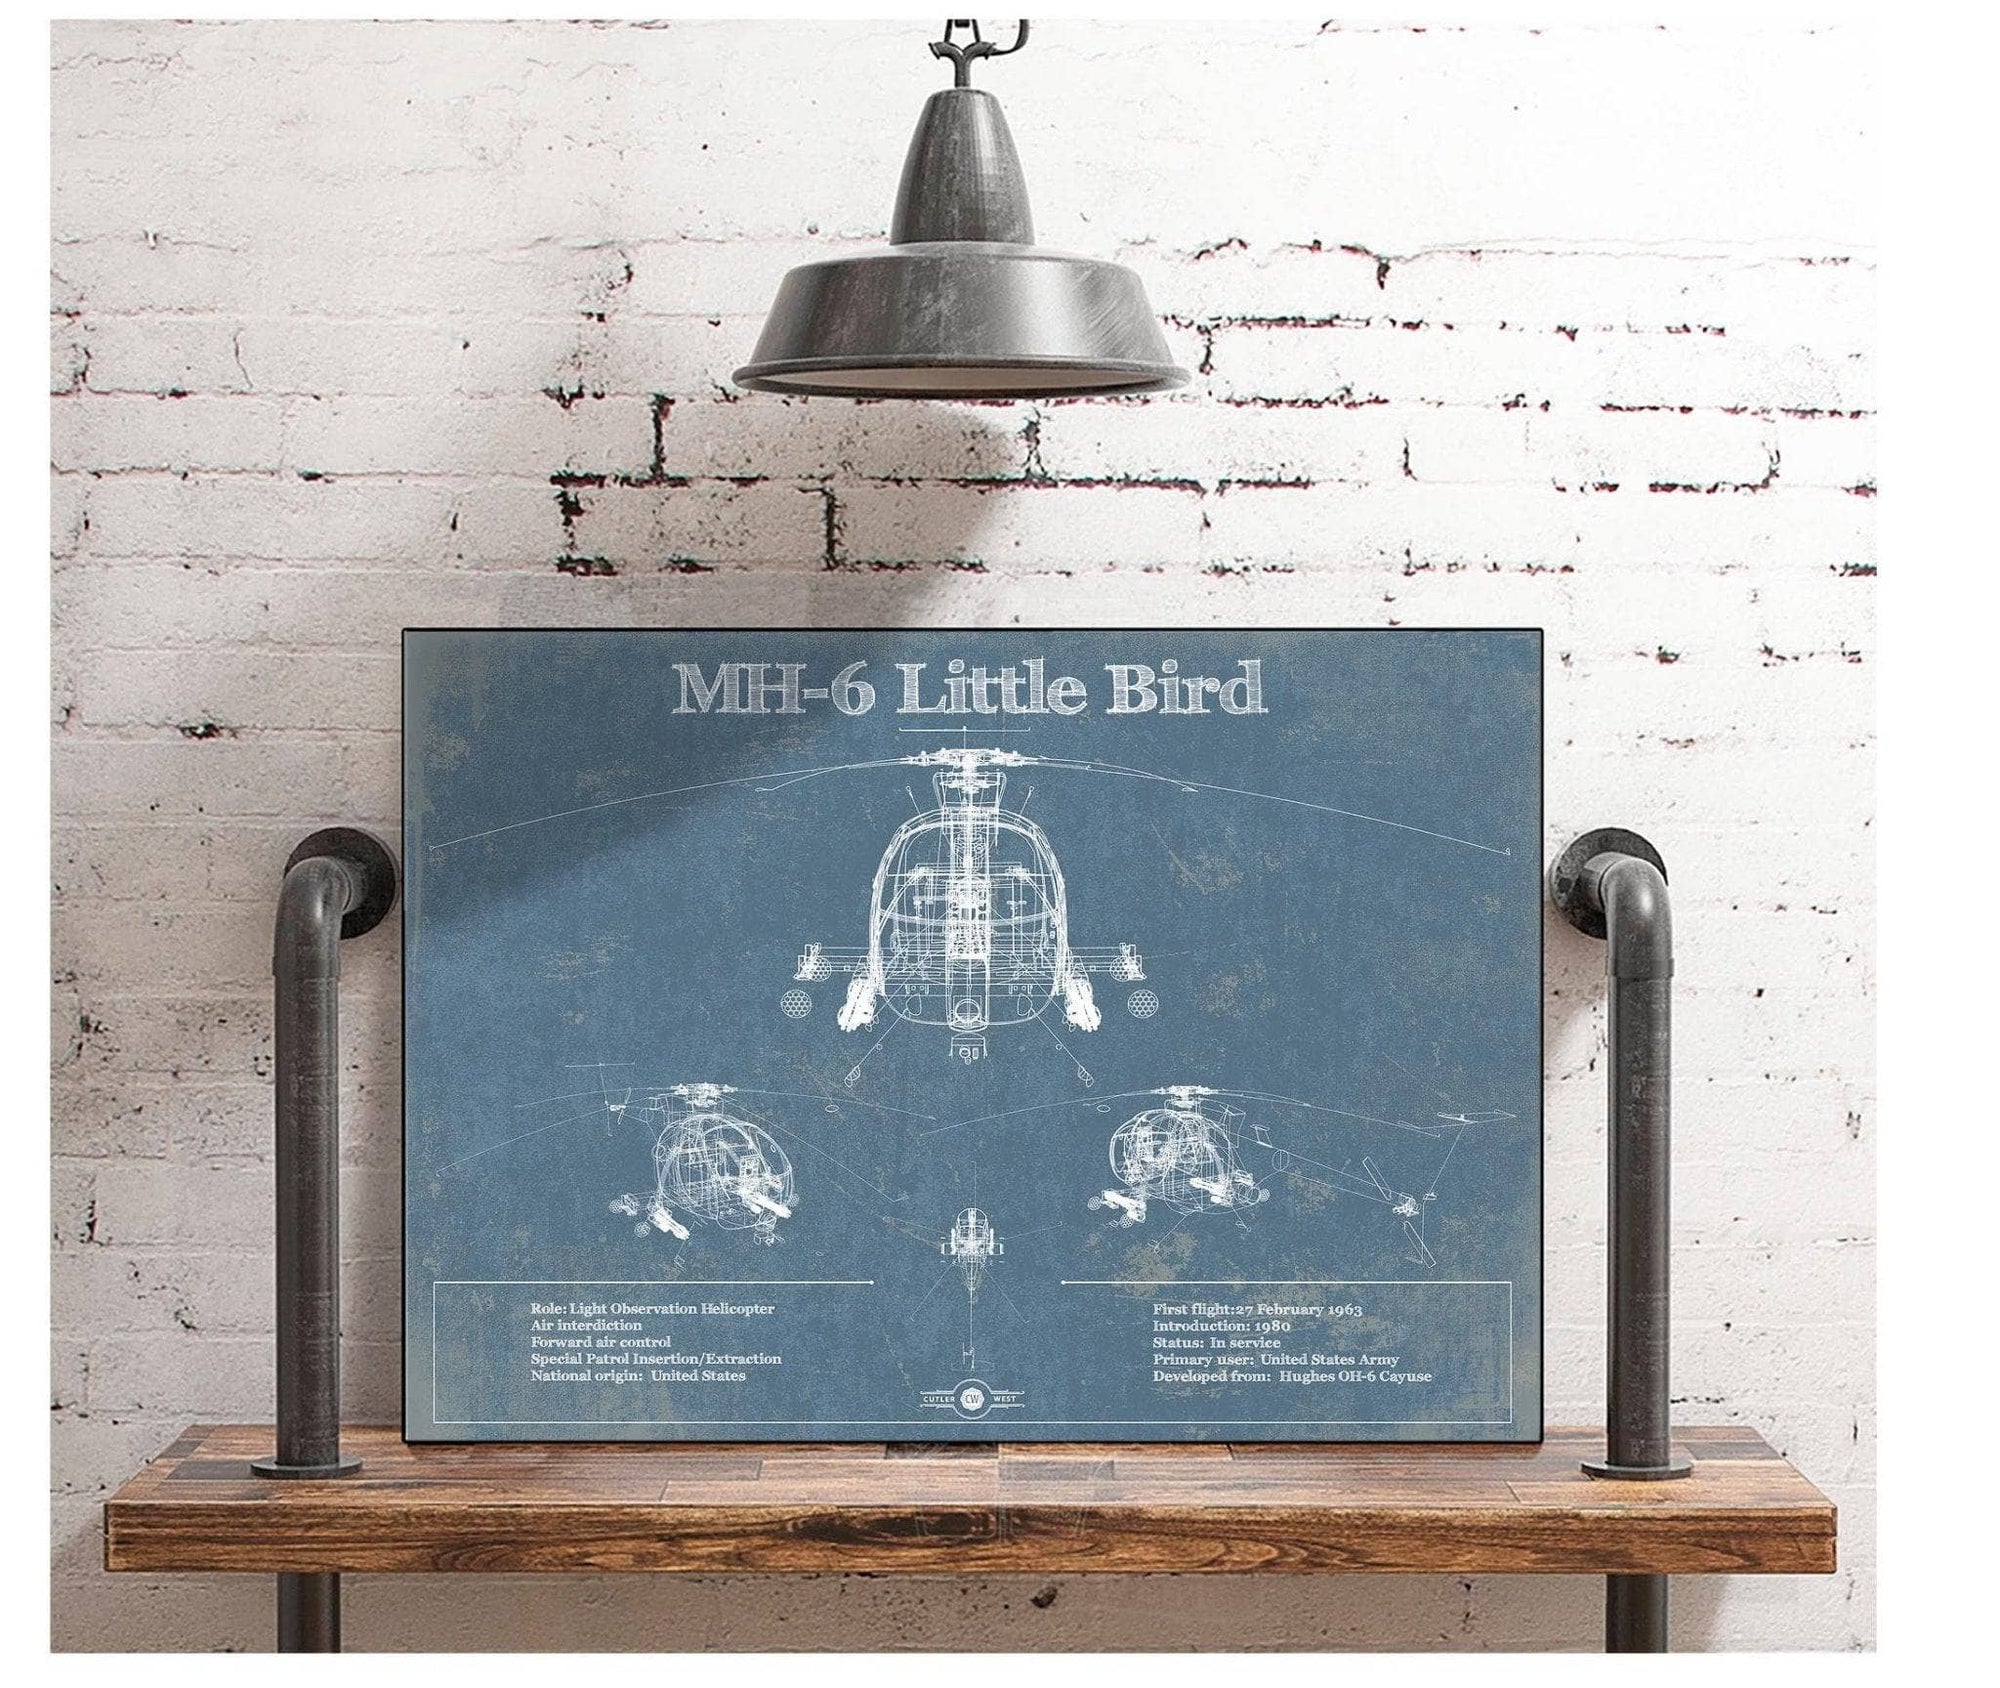 Cutler West Military Aircraft MH-6 Little Bird Helicopter Vintage Aviation Blueprint Military Print